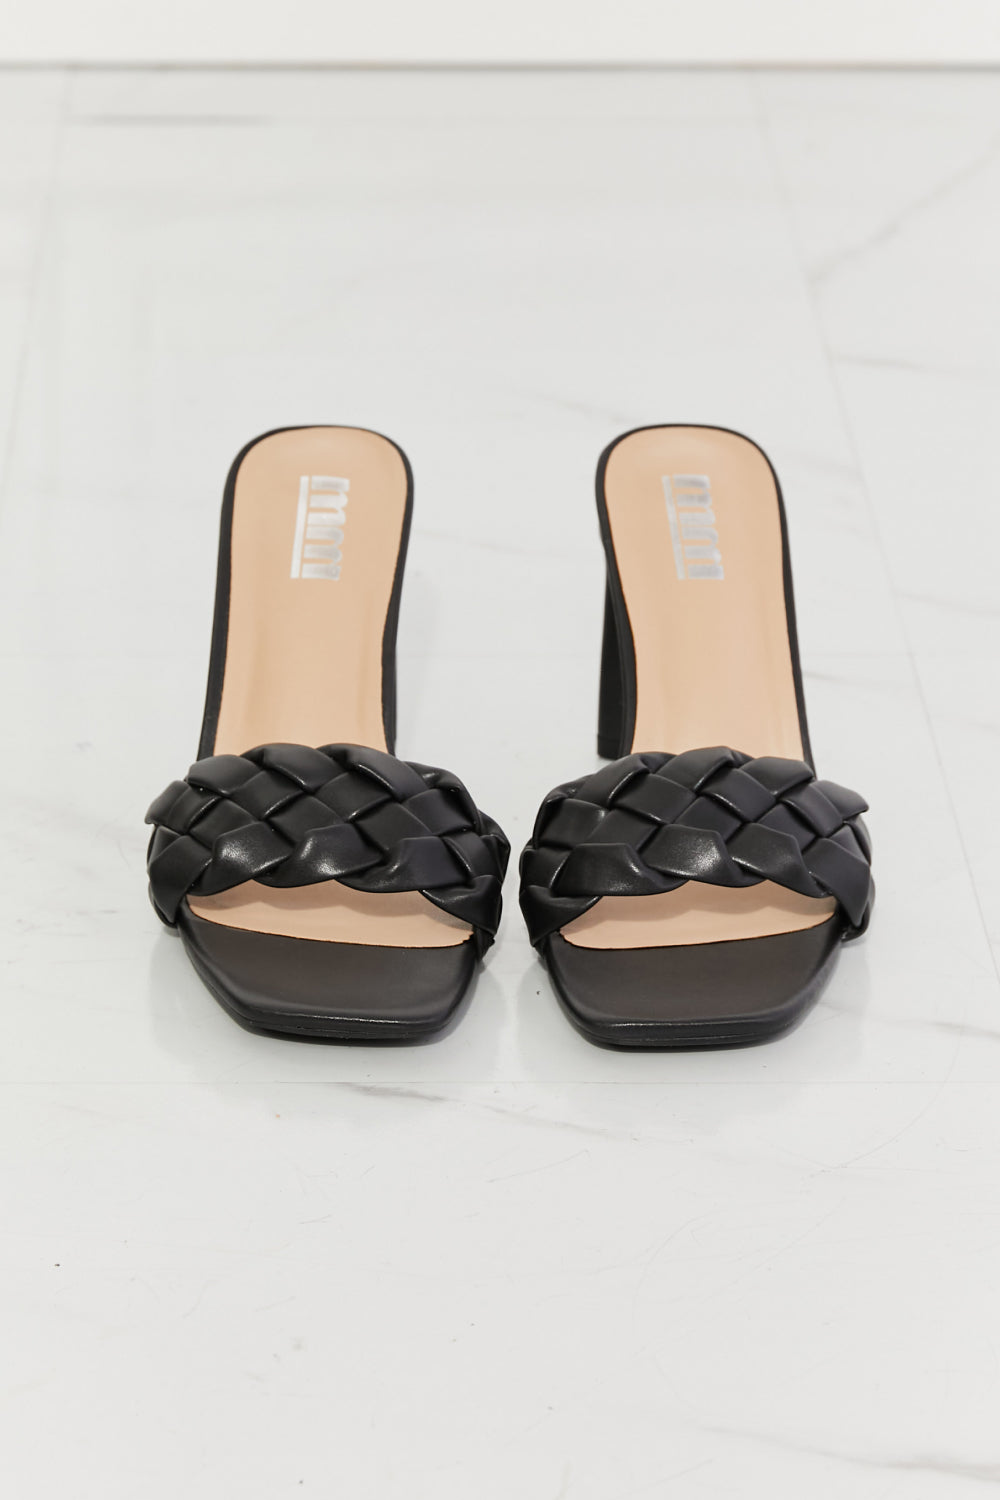 MMShoes Top of the World Braided Block Heel Sandals in Black - nailedmoms